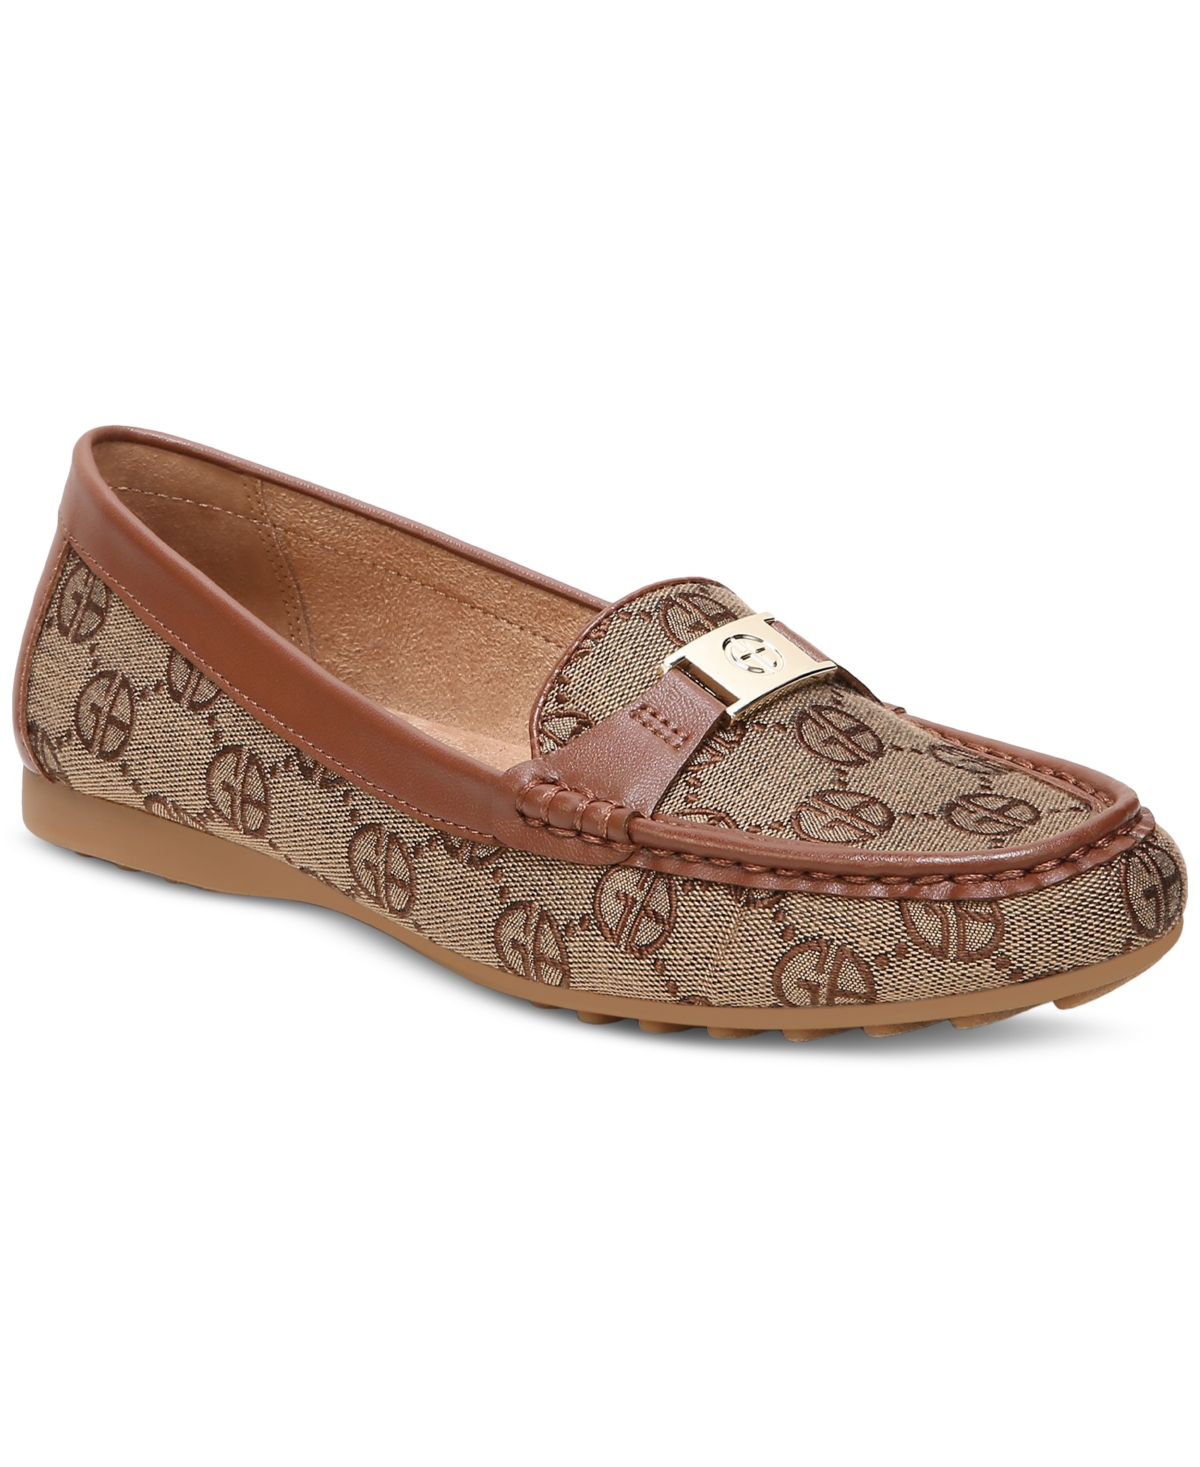 Women's Dailyn Memory Foam Slip On Loafers, Created for Macy's - Brown Leather